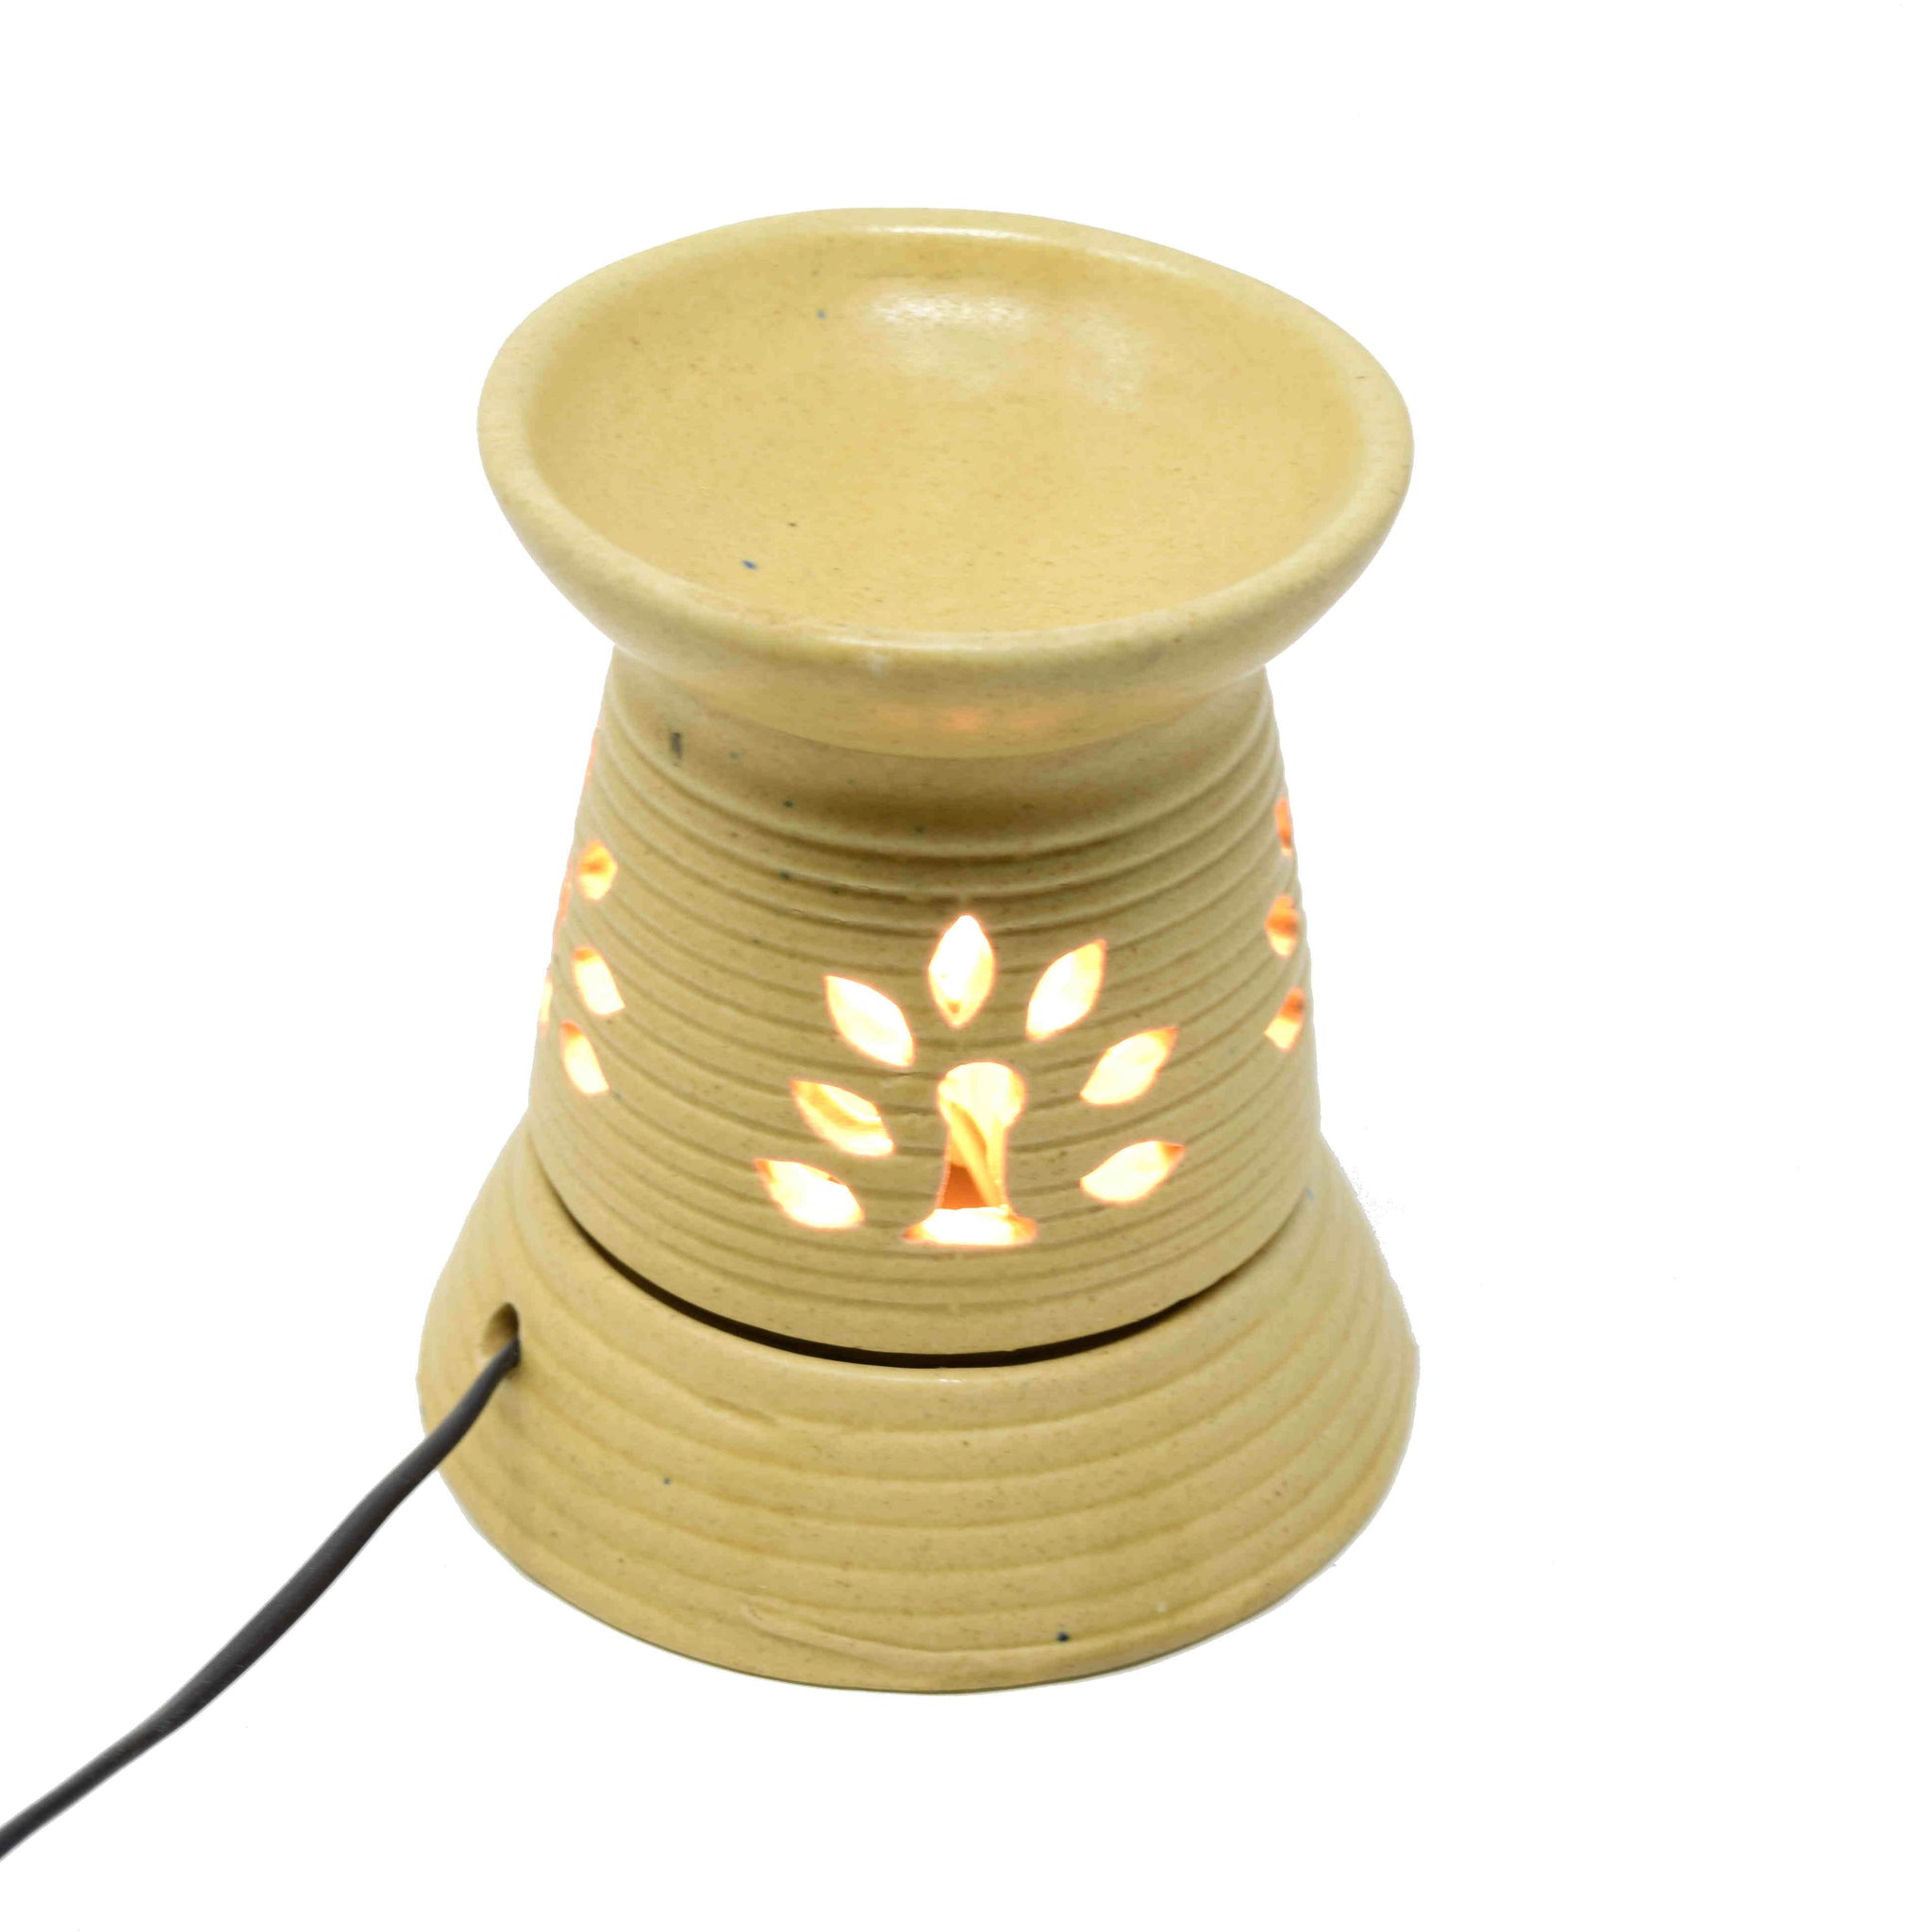 beige or tan color electric diffuser